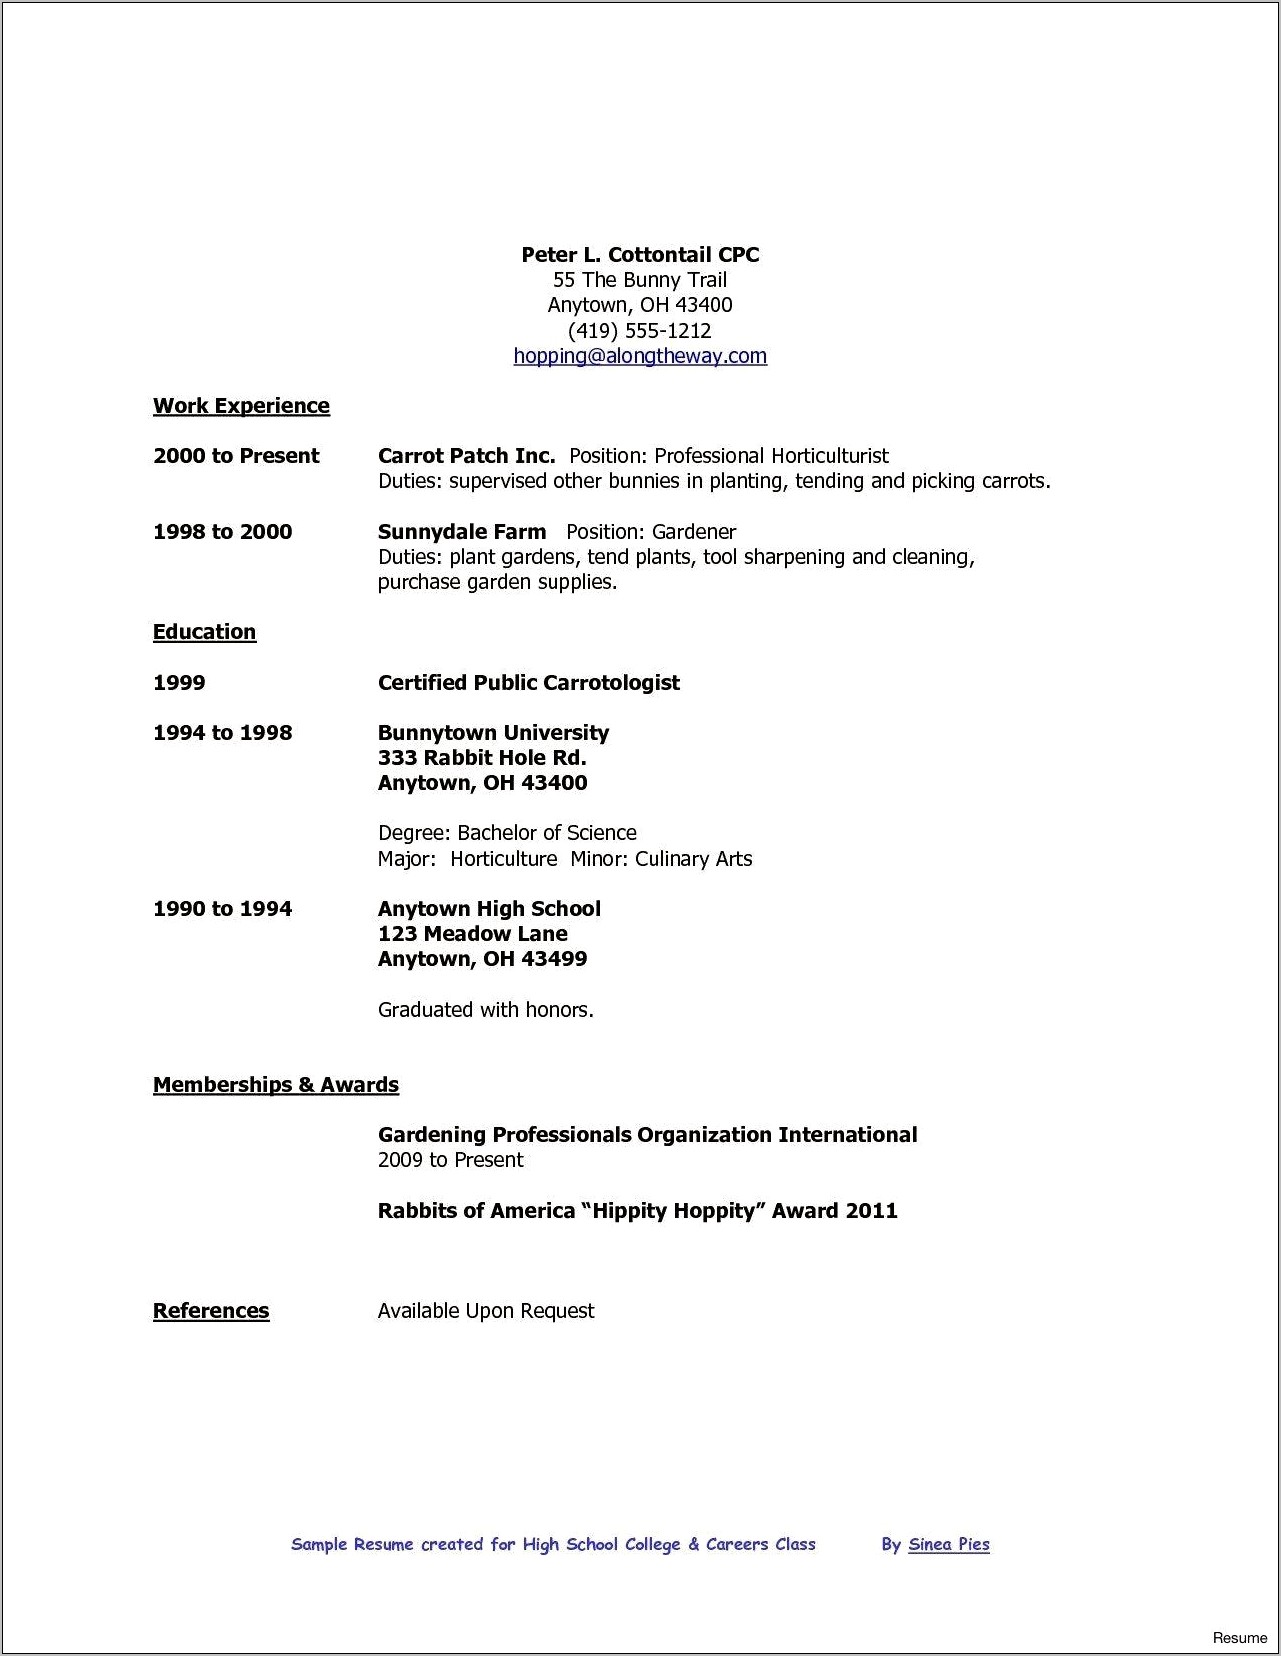 Resume For Someone That Graduate High School